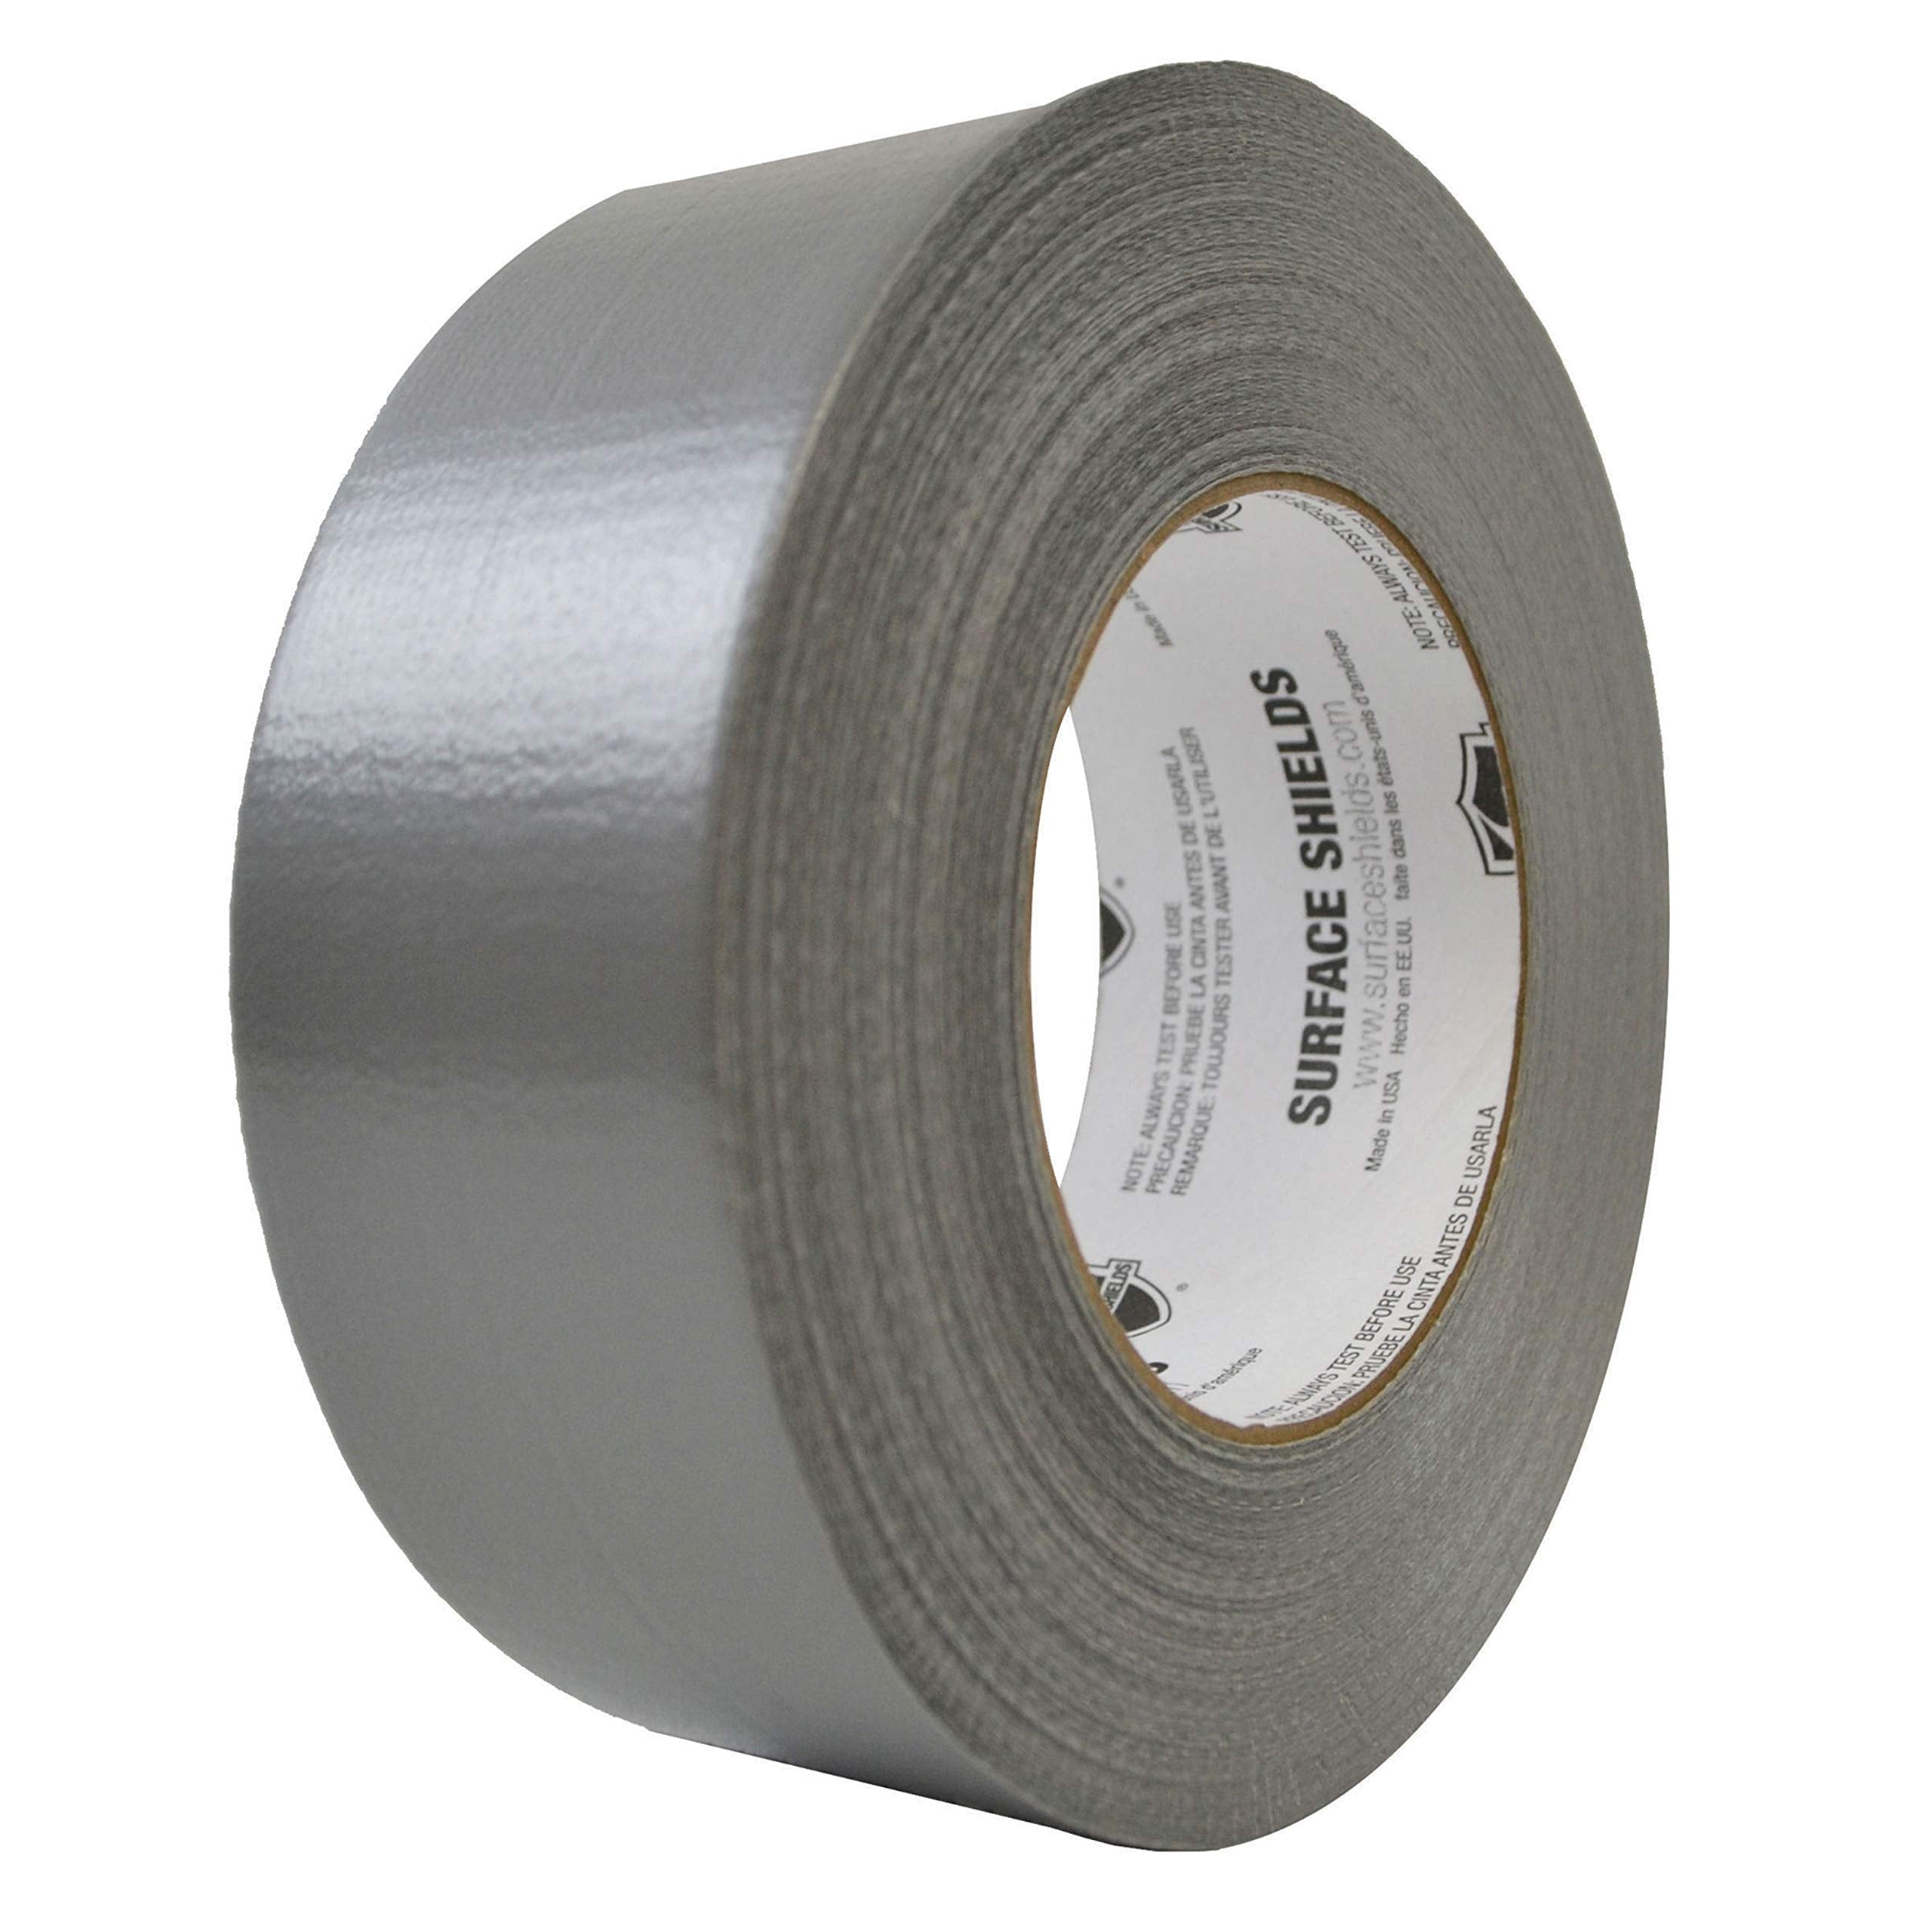 AP Products 022-DUG48S Tape Duct, Silver, 2" Width x 60 Yards Length